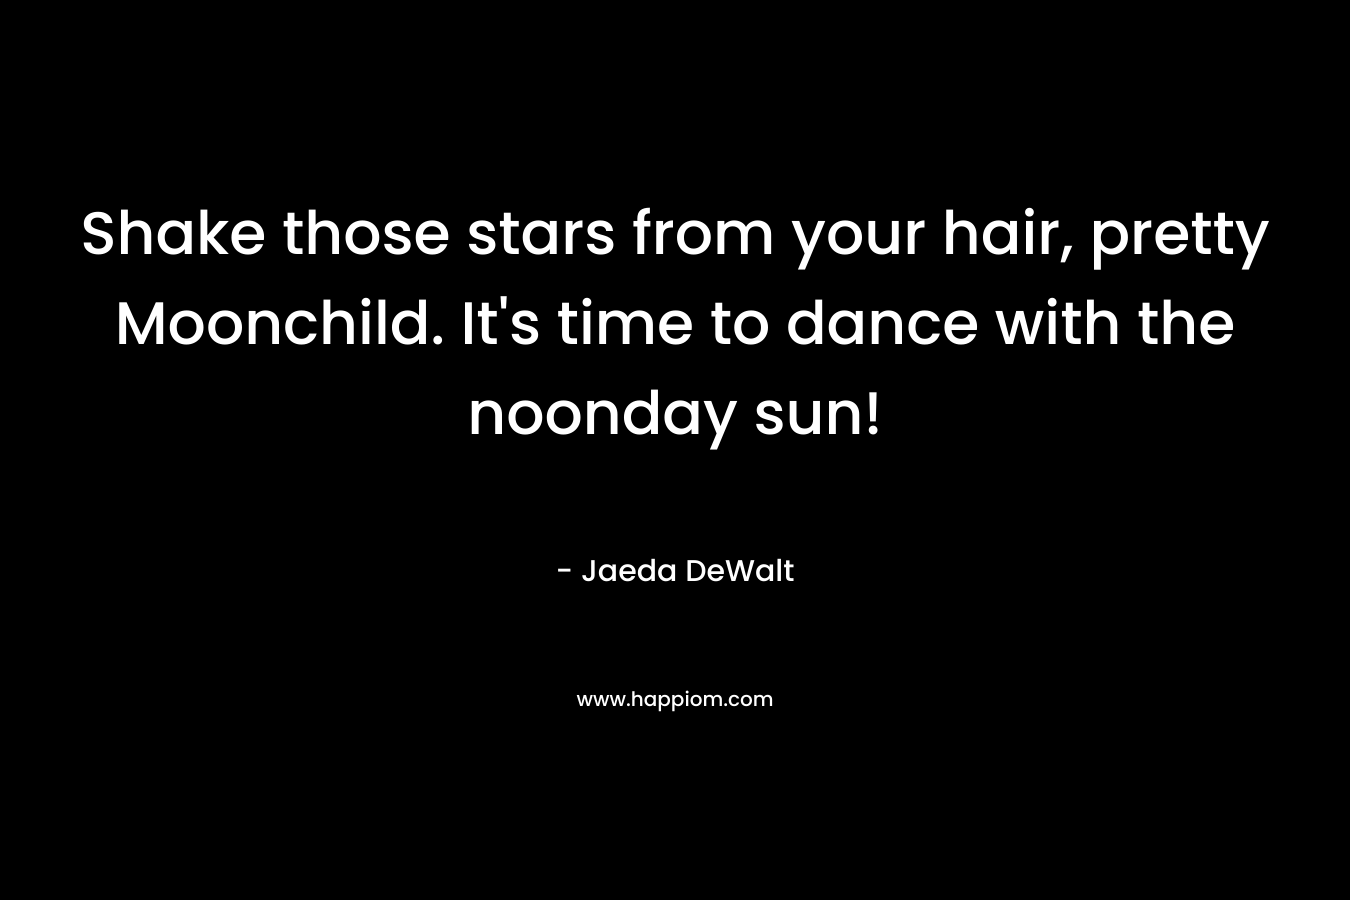 Shake those stars from your hair, pretty Moonchild. It’s time to dance with the noonday sun! – Jaeda DeWalt